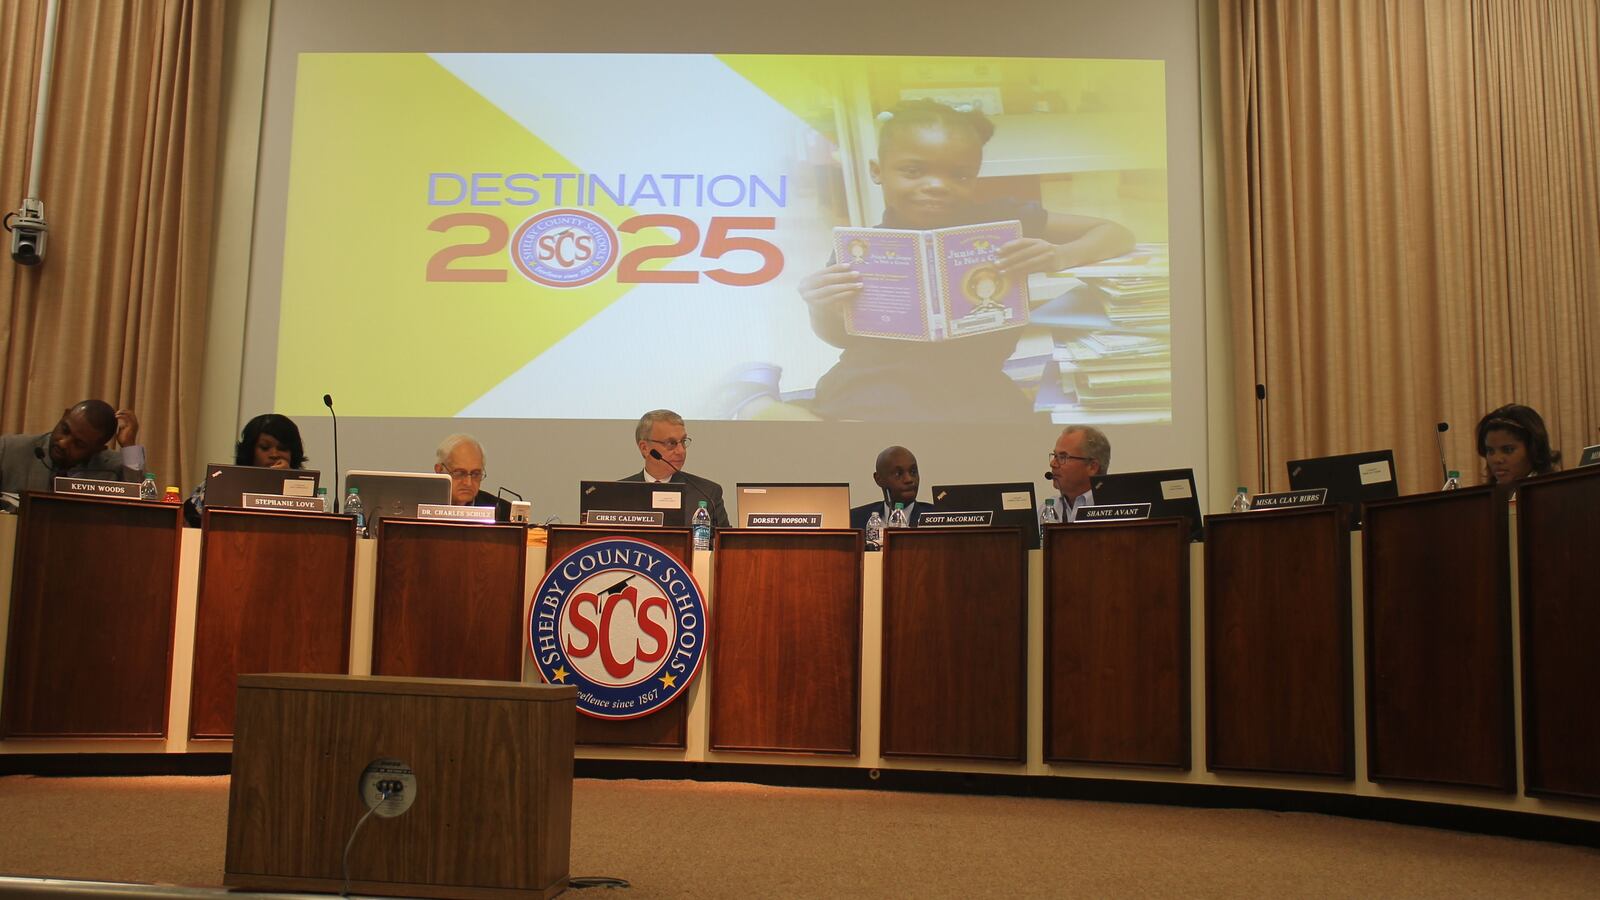 The Shelby County Board of Education reviews the Memphis district's Destination 2025 goals.